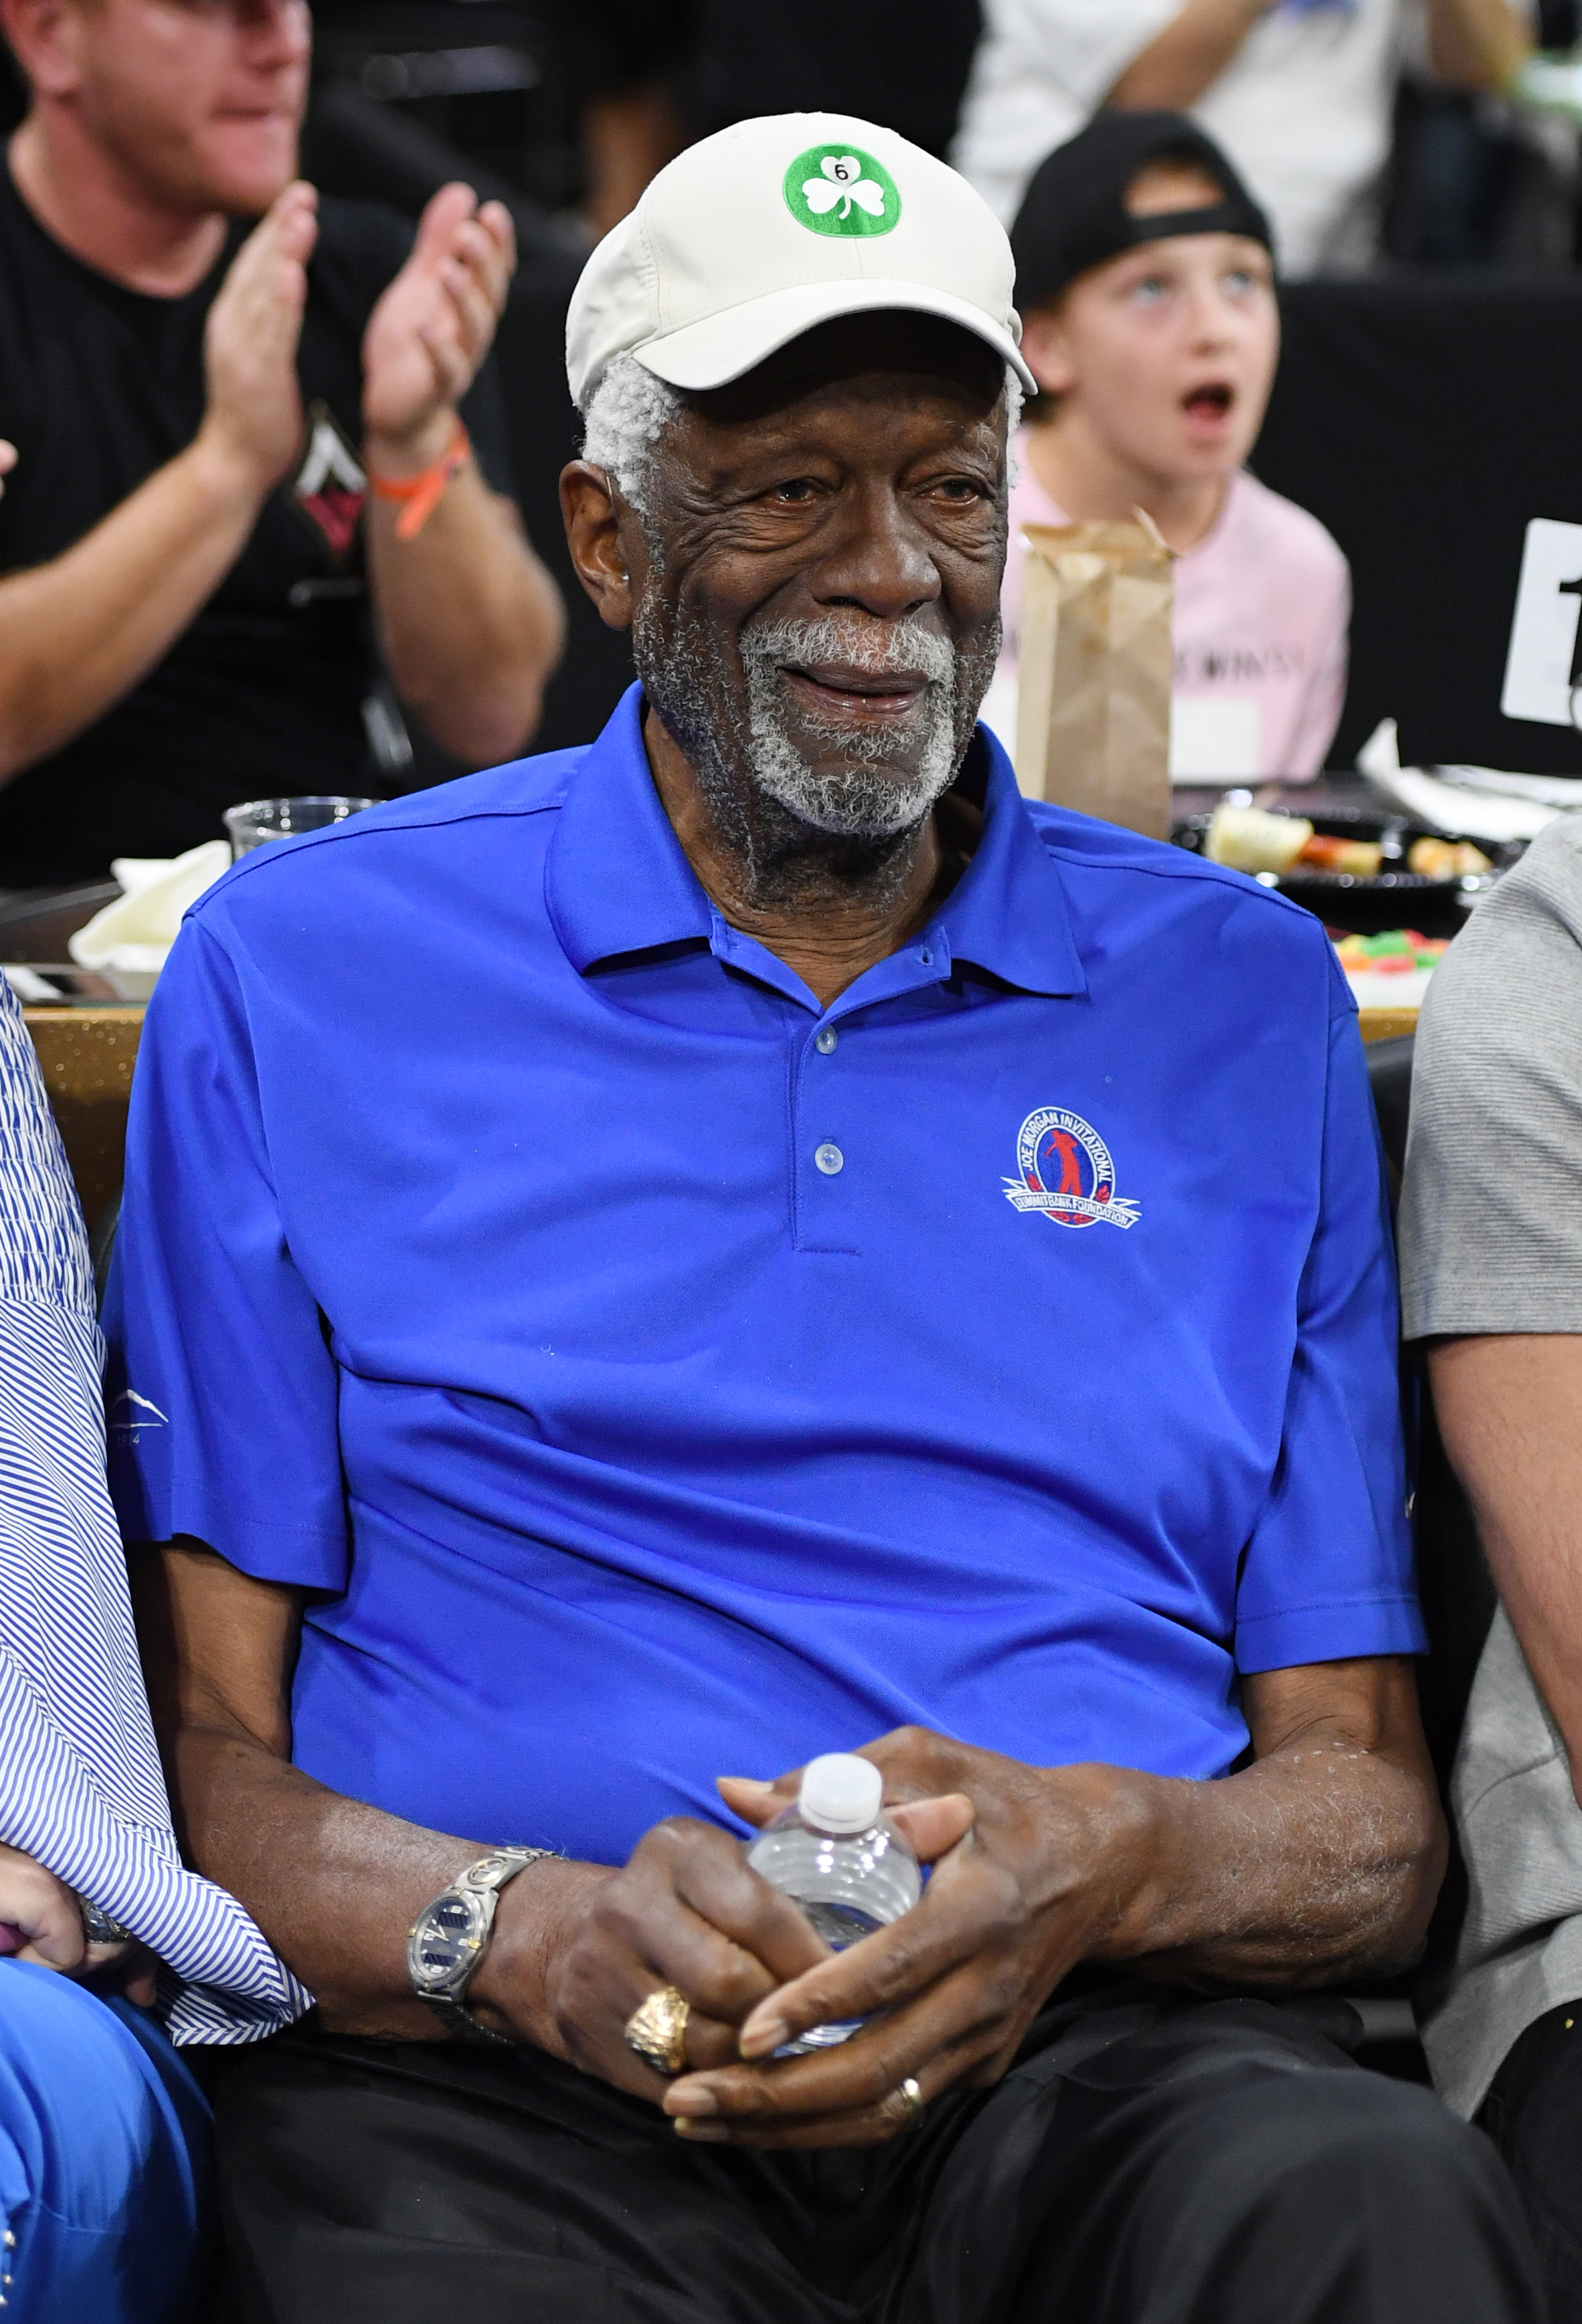 Bill Russell attends a game between the Minnesota Lynx and the Las Vegas Aces at the Mandalay Bay Events Center on July 21, 2019 in Las Vegas, Nevada. | Source: Getty Images